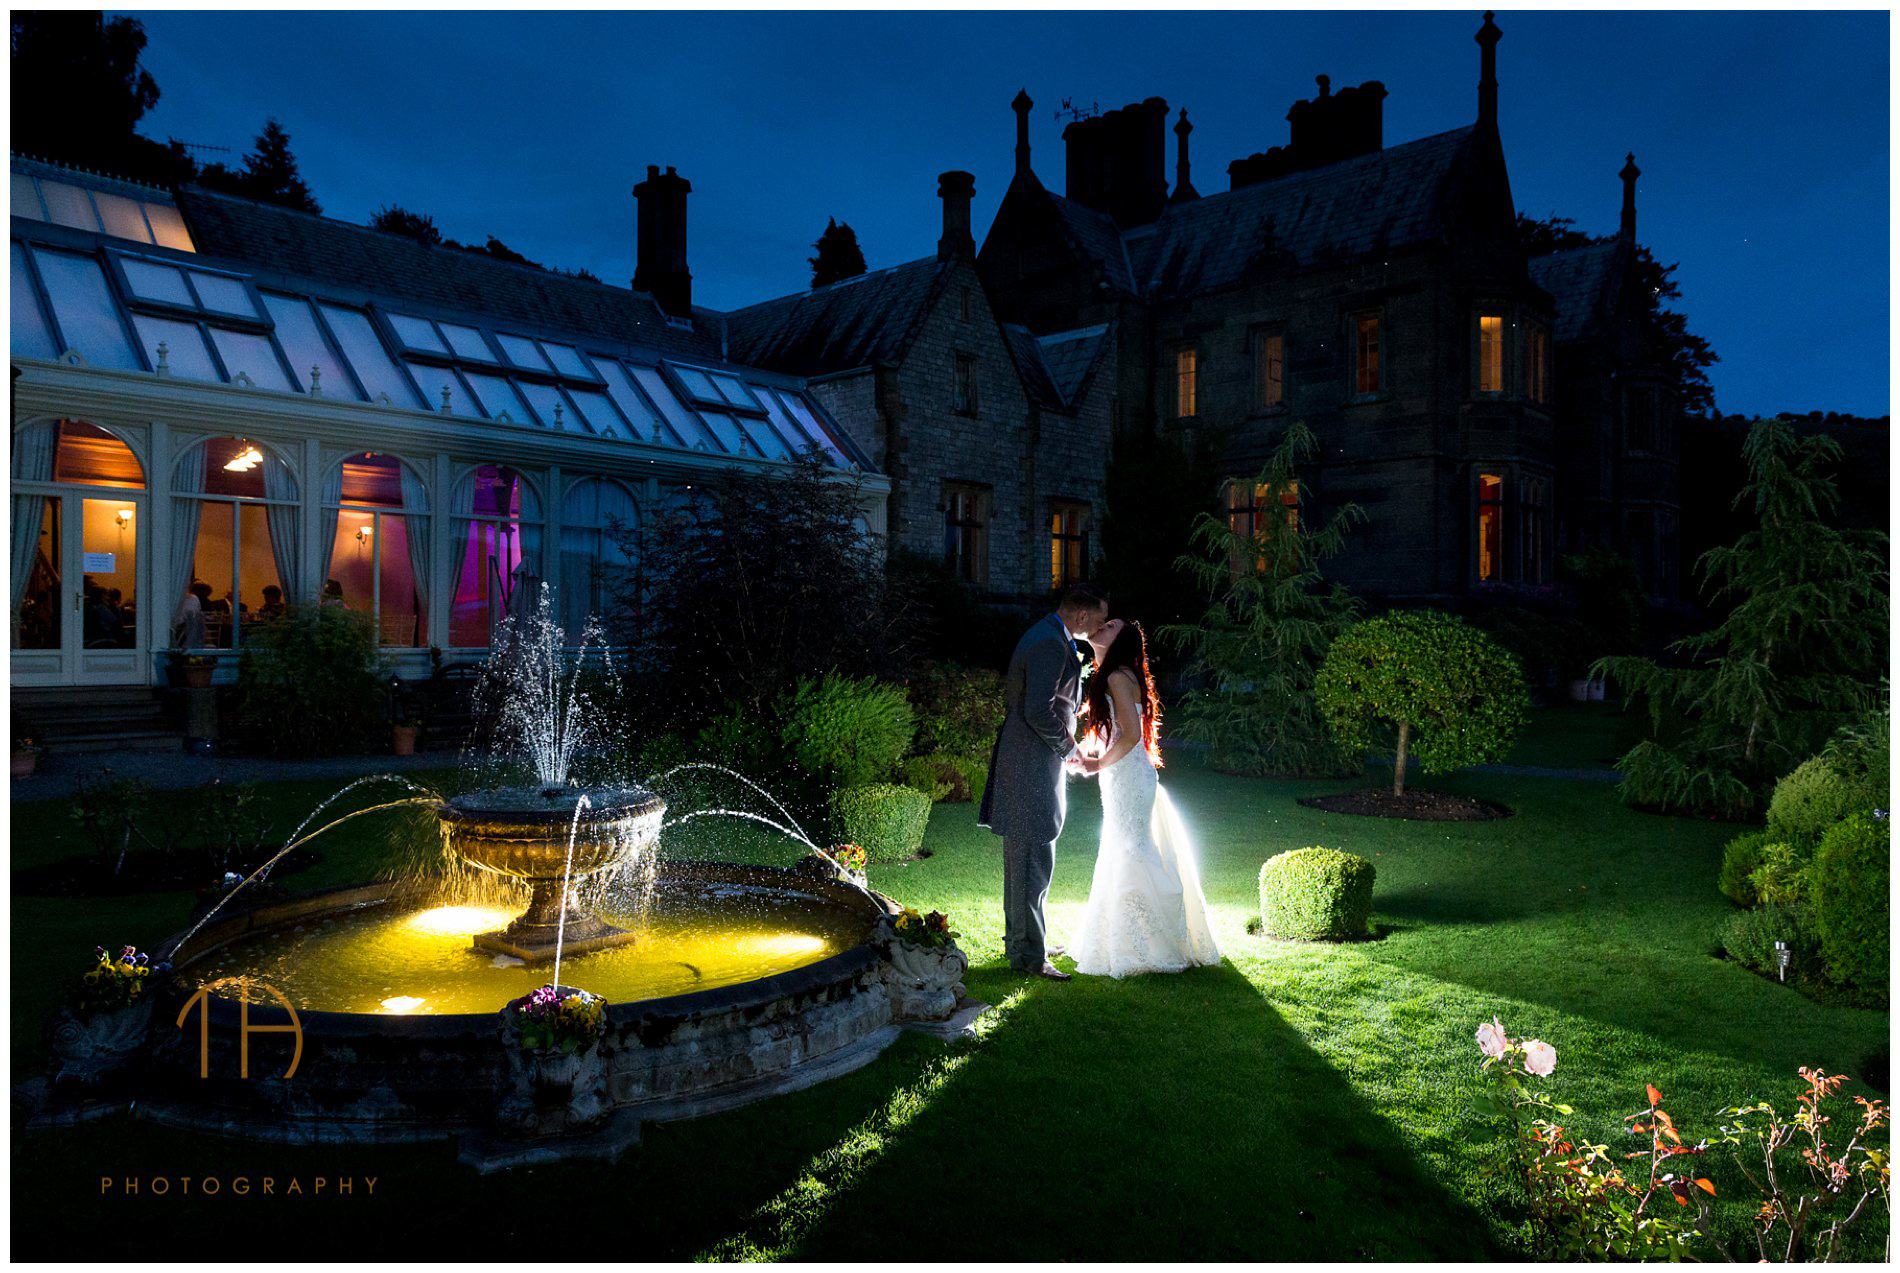 Creative wedding photography in Derbyshire by Tim Hensel